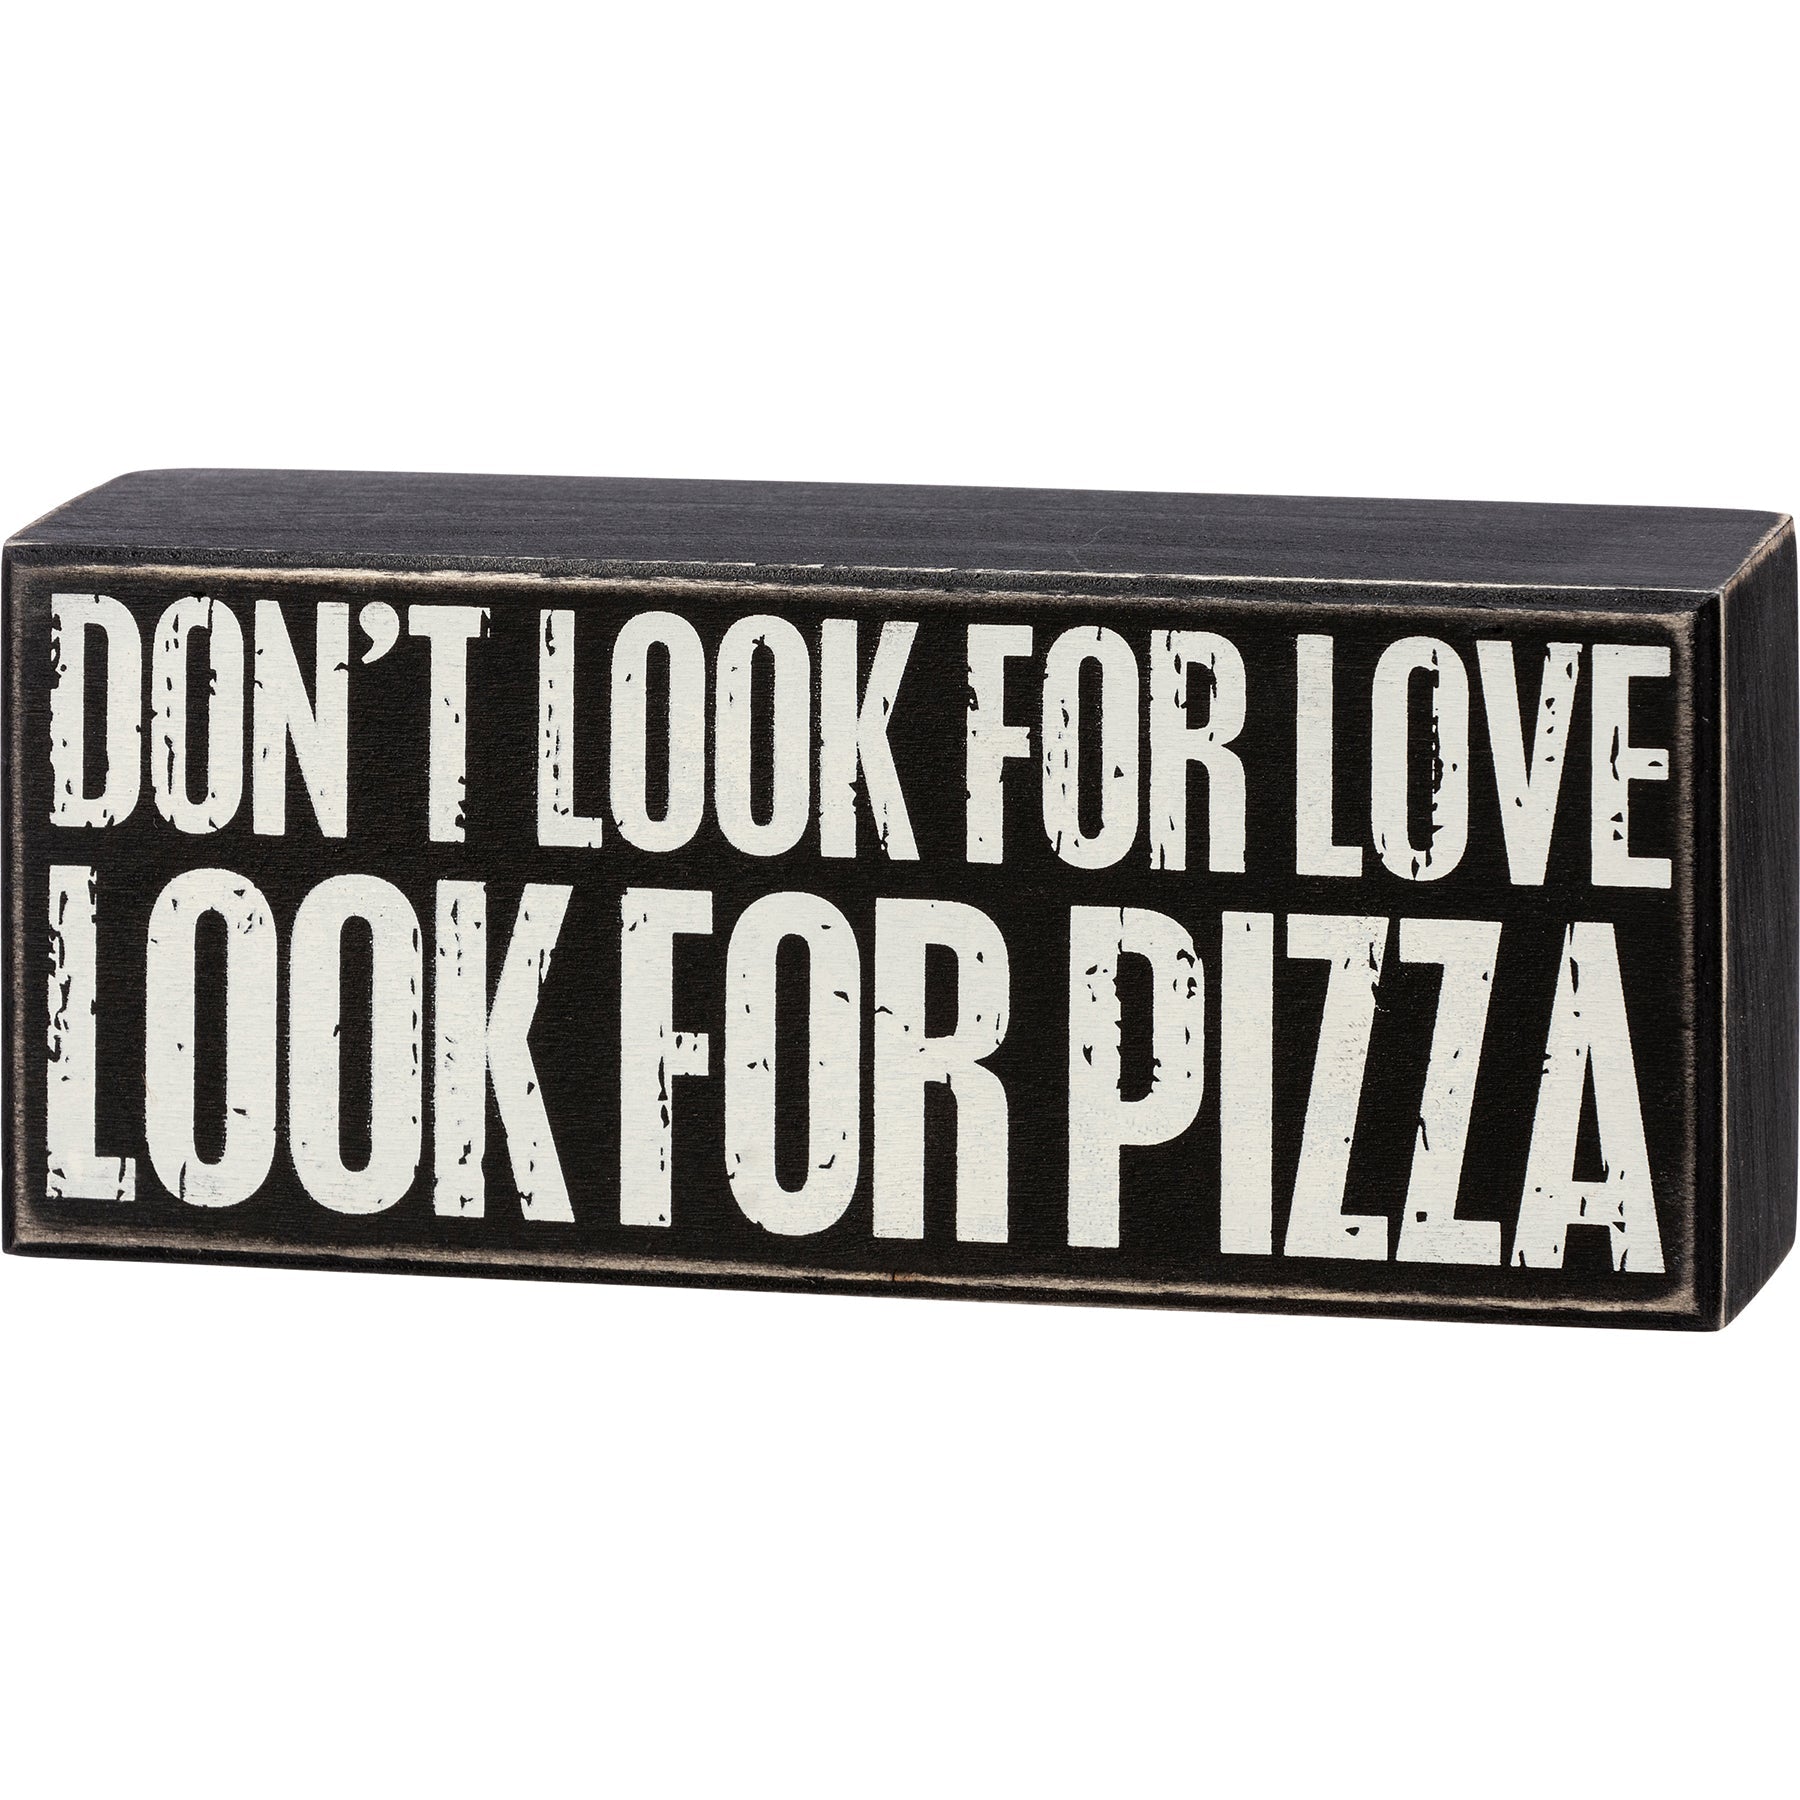 Don't Look For Love Look For Pizza Wooden Box Sign, Funny/Rustic/Modern Quote Wall Art, Living/Dining/Bedroom, Cute Farmhouse Decor